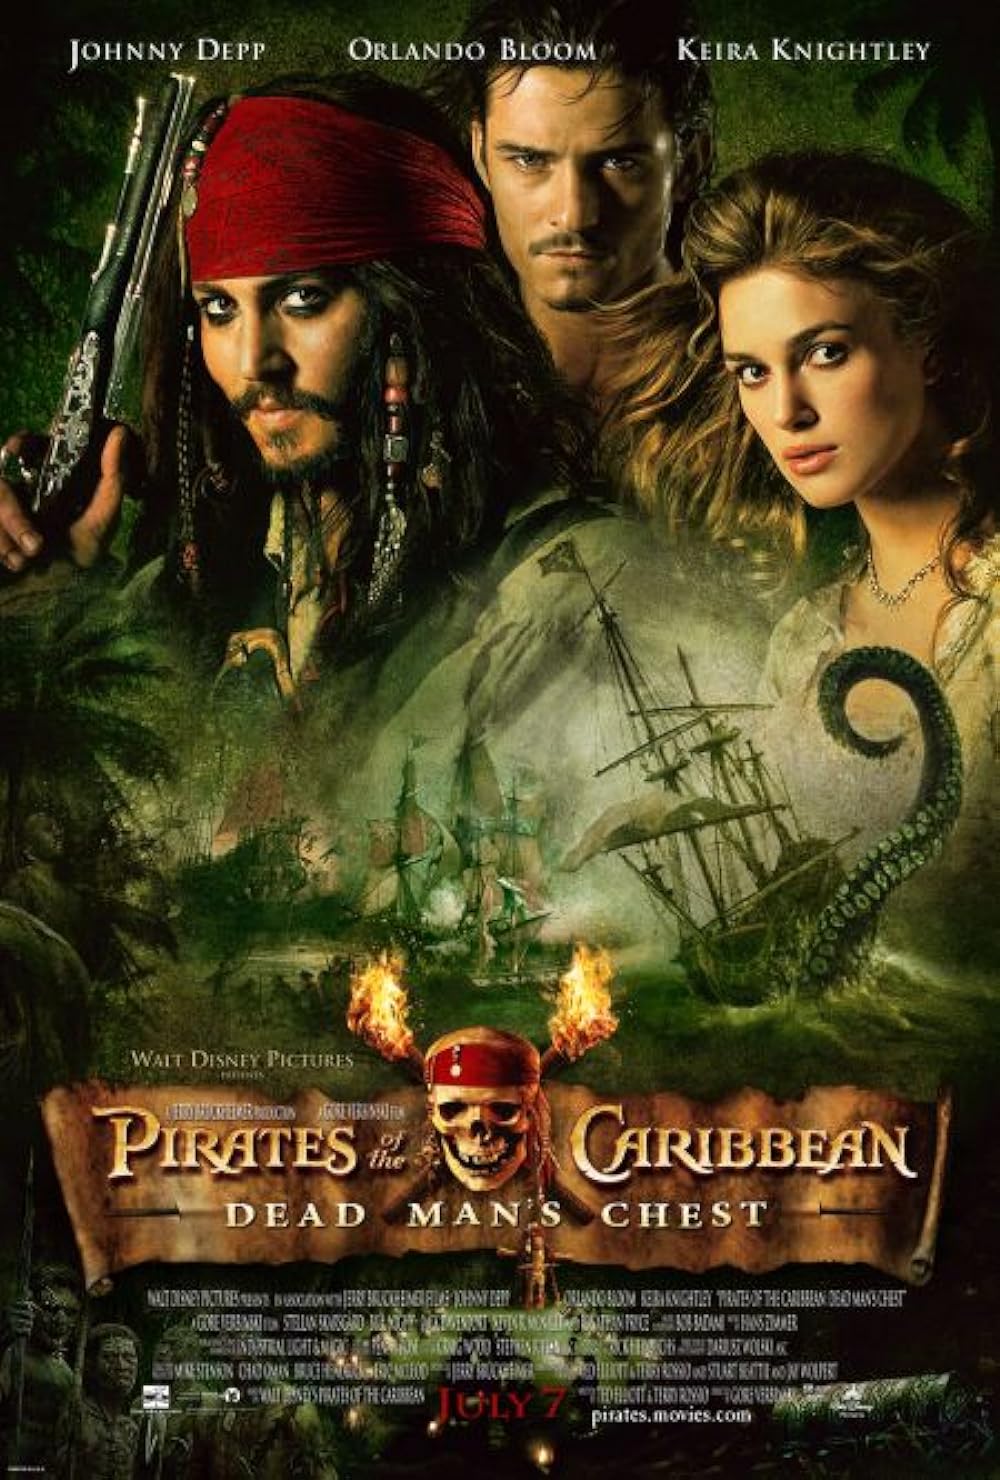 cast of pirates of the caribbean 2